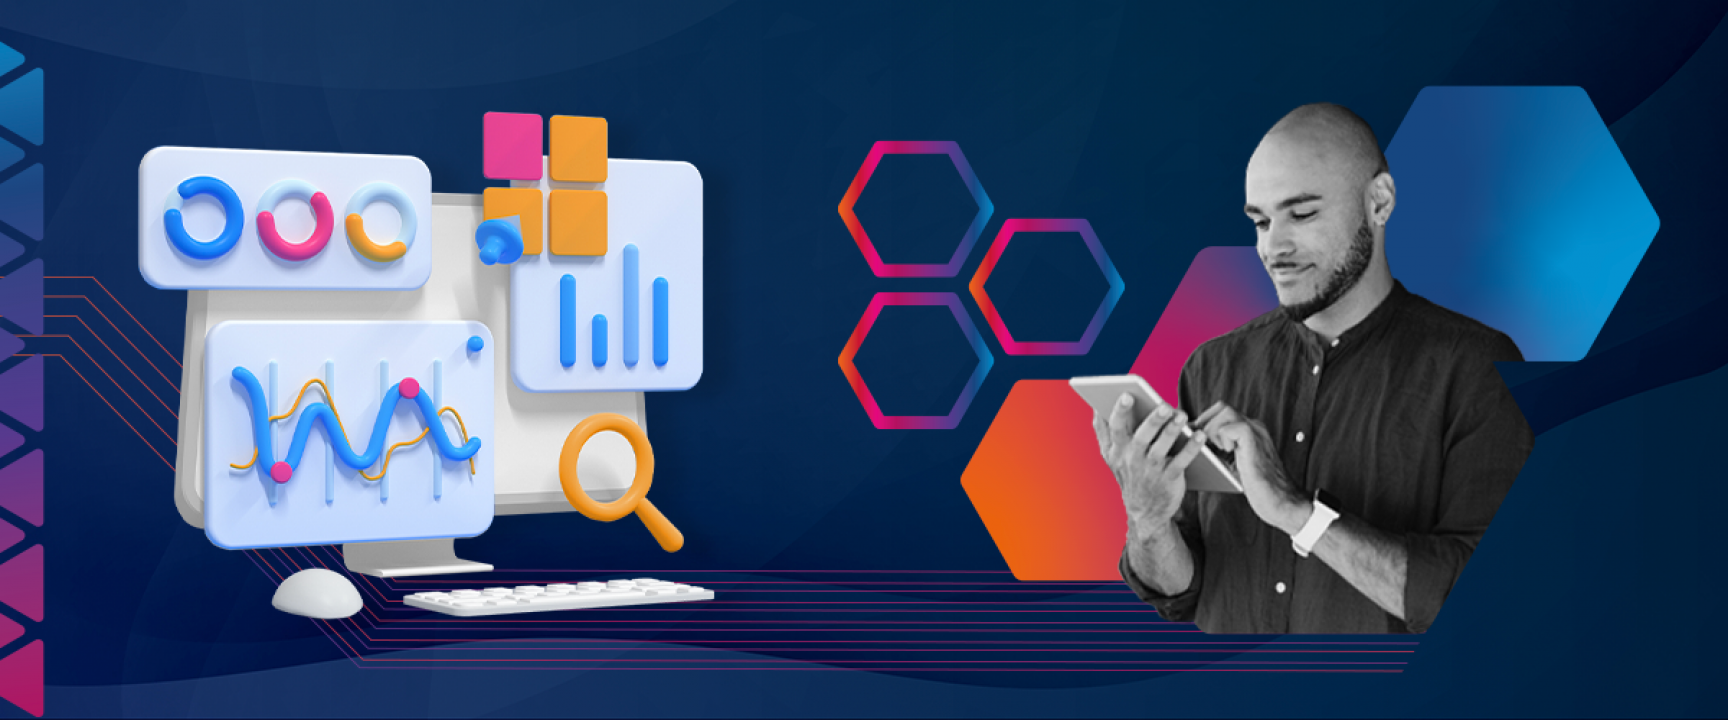 Financial planning blog header, showing financial analytics and a man holding a tablet .